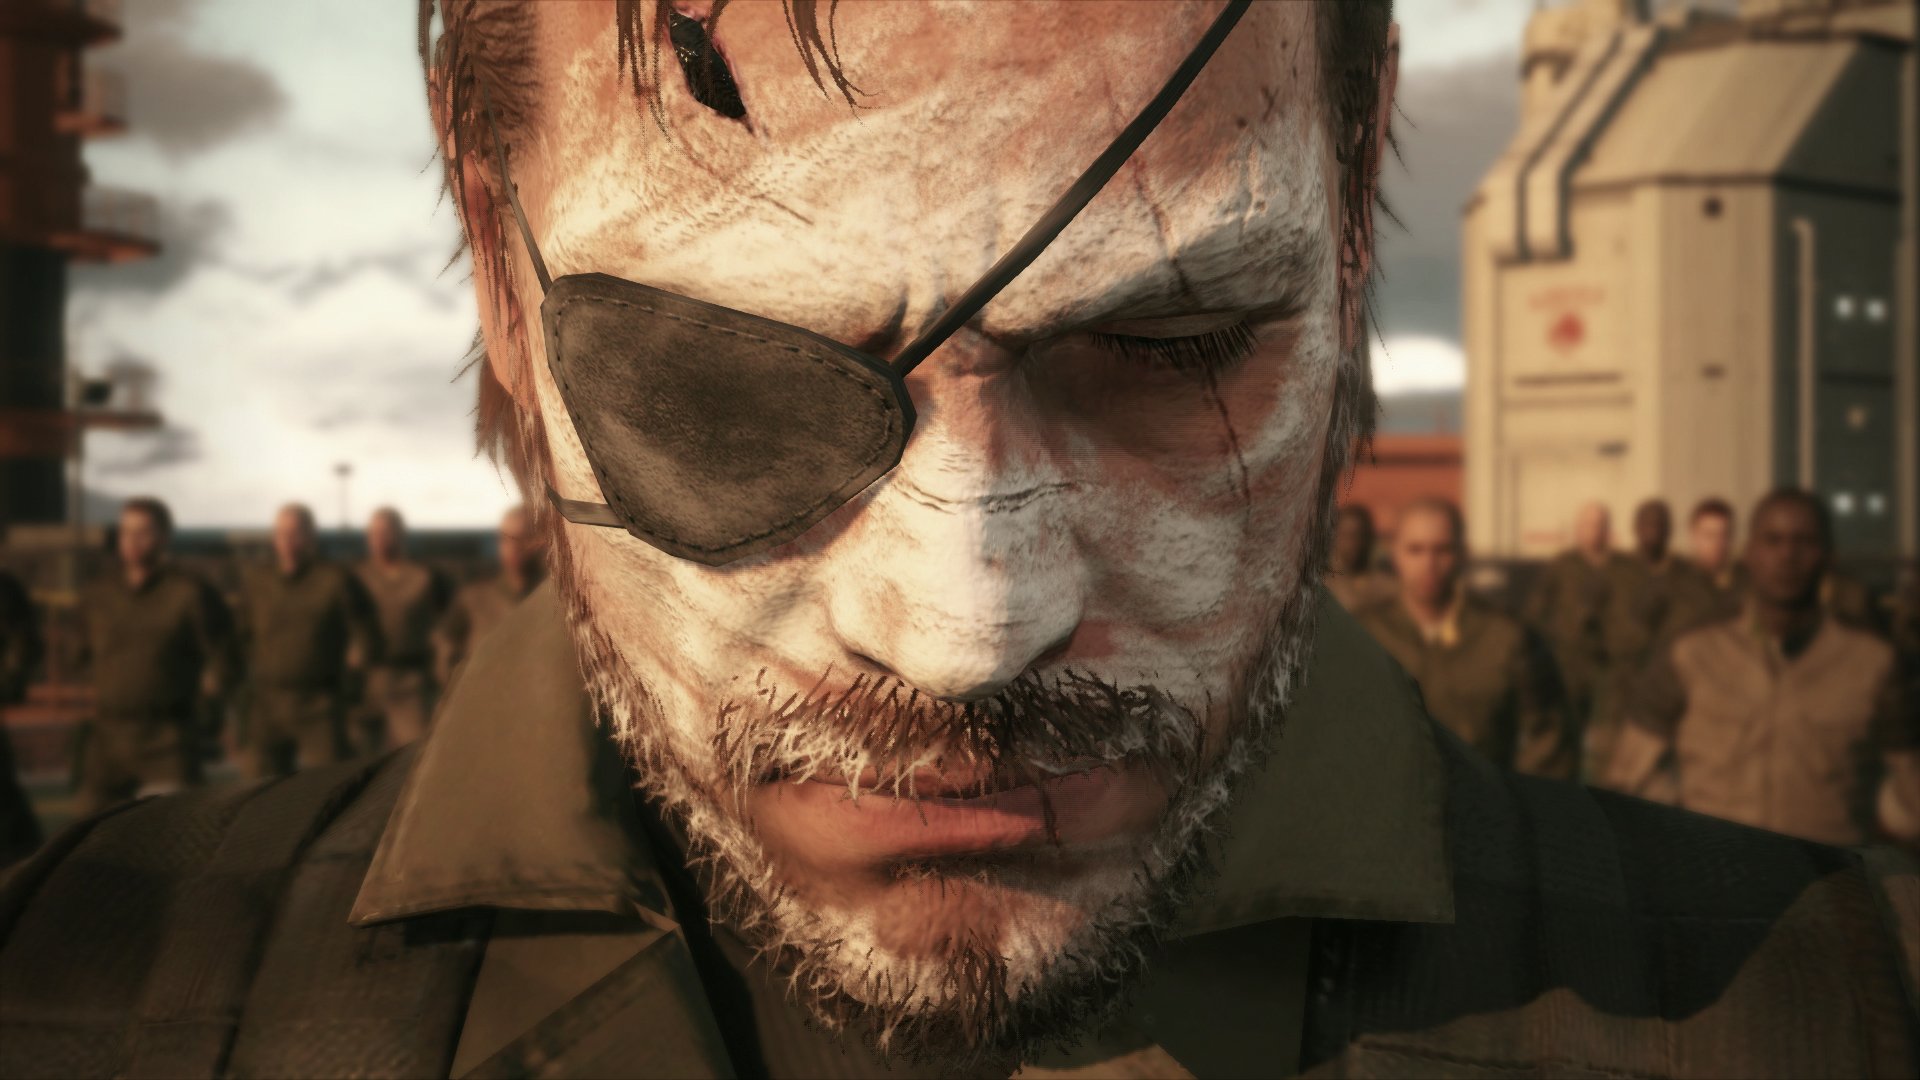 METAL GEAR SOLID V The Definitive Experience 10